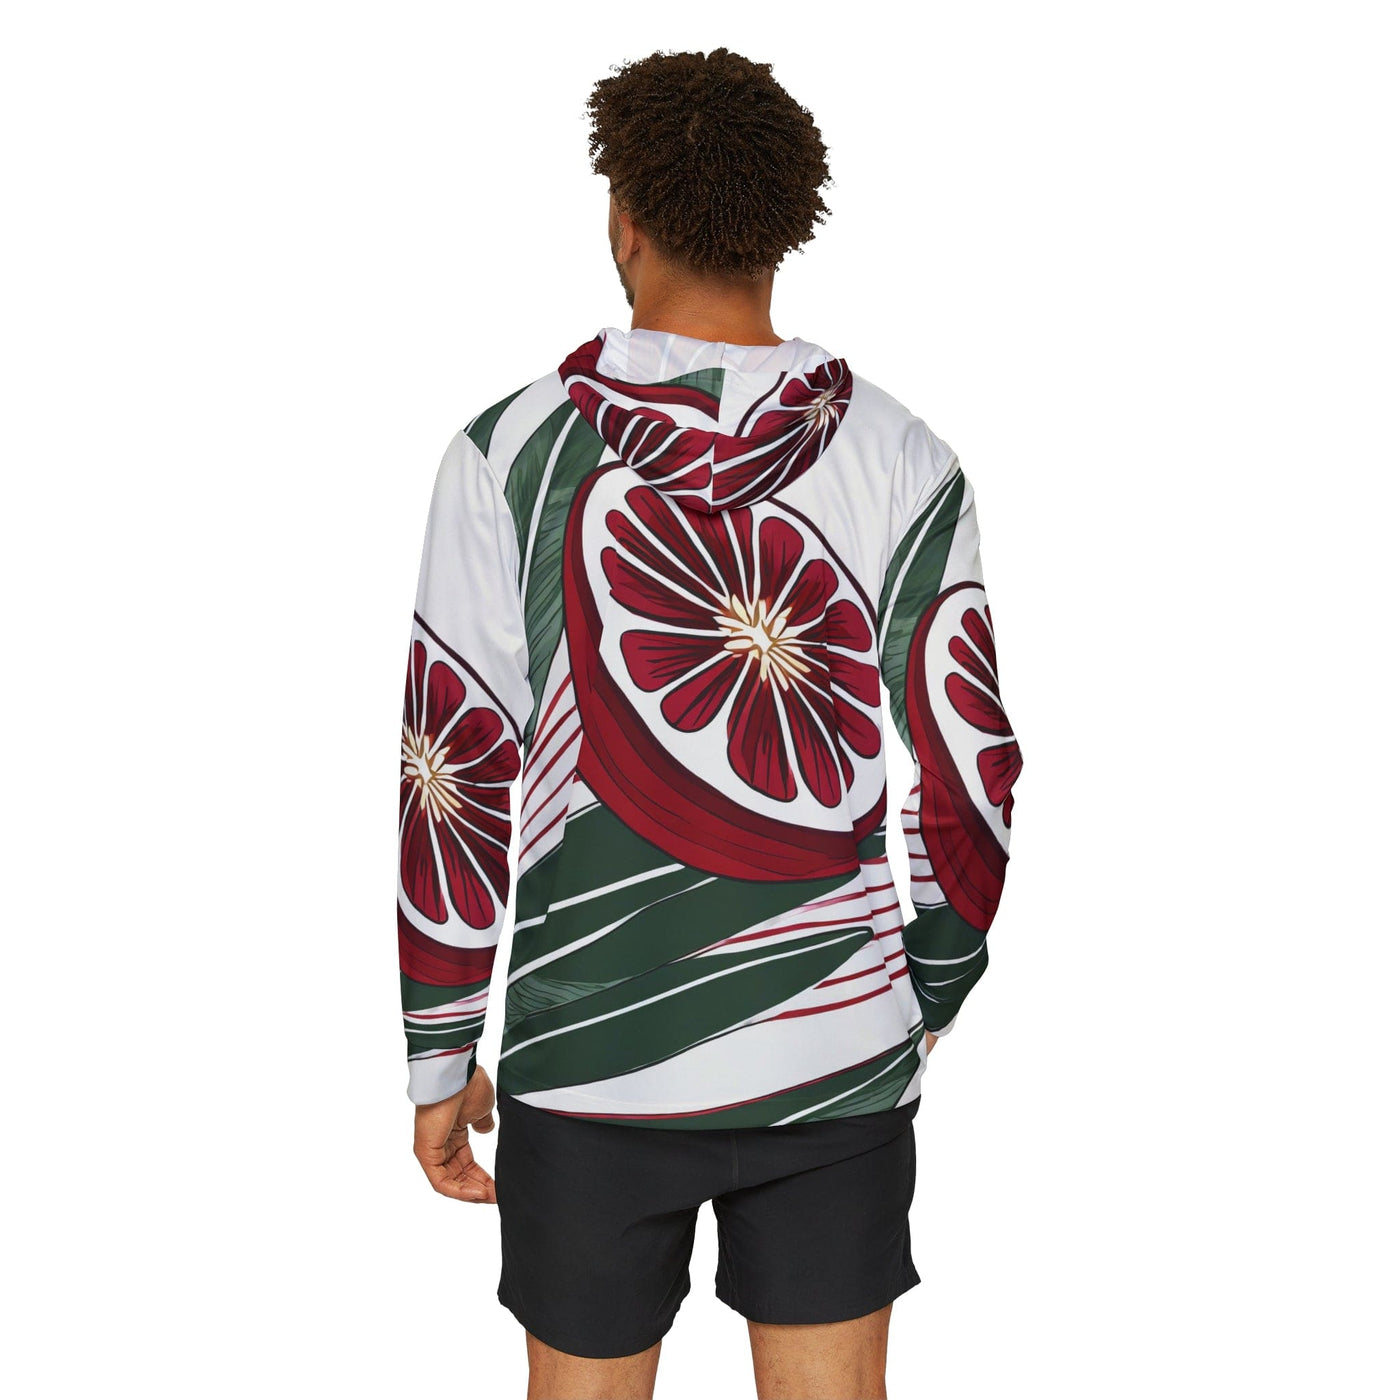 Mens Sports Graphic Hoodie Floral Line Art Print 8332 - All Over Prints